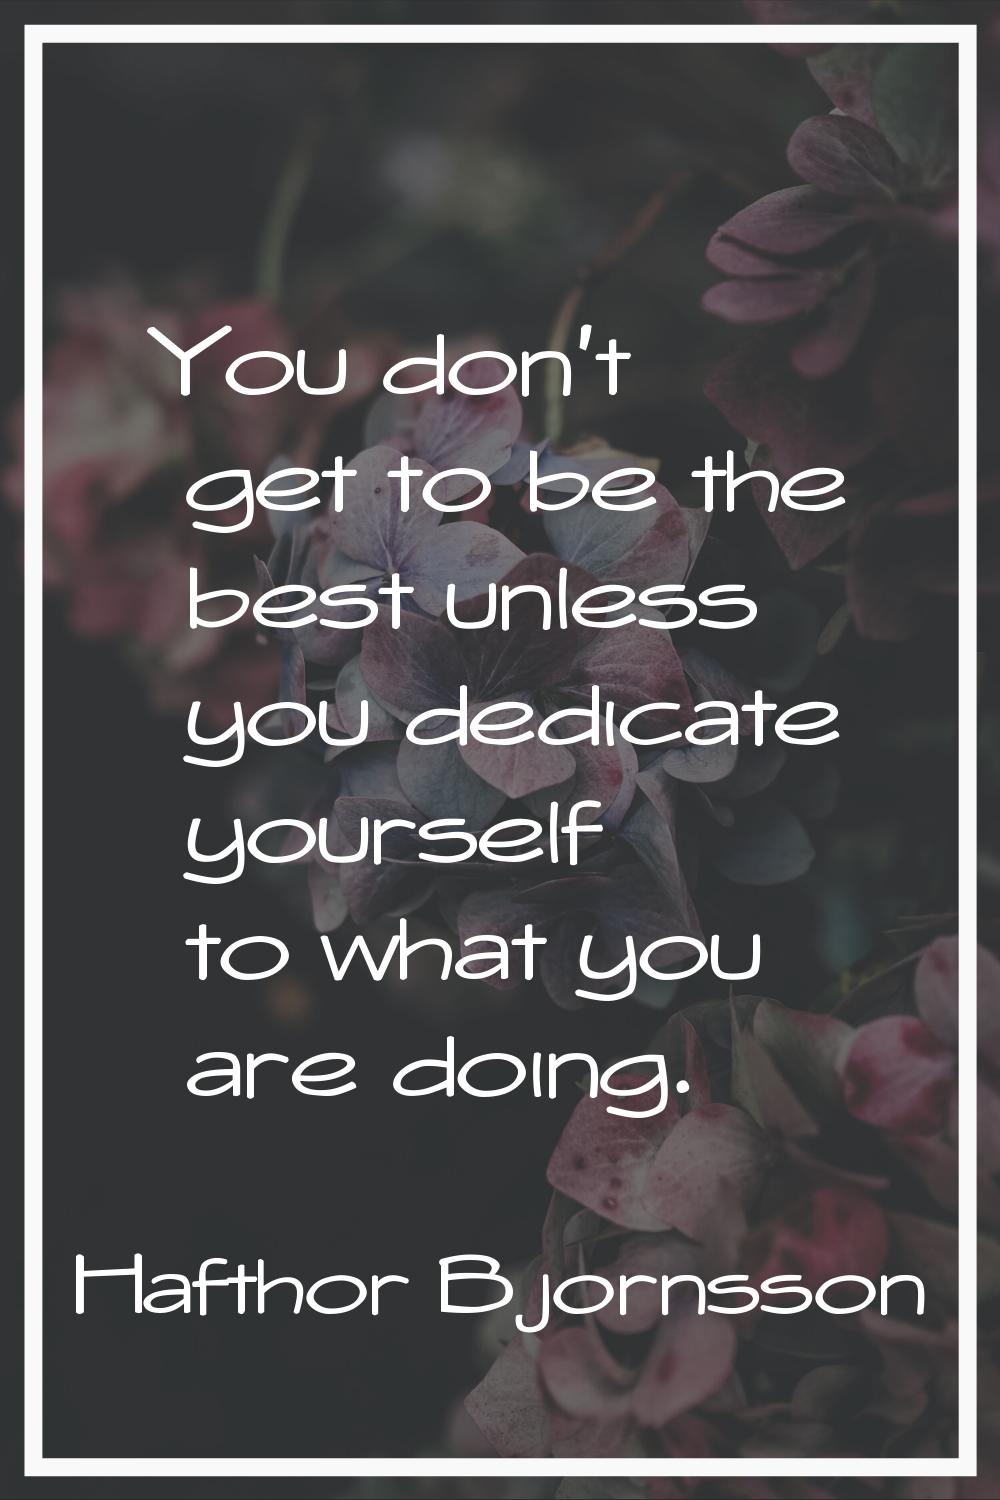 You don't get to be the best unless you dedicate yourself to what you are doing.